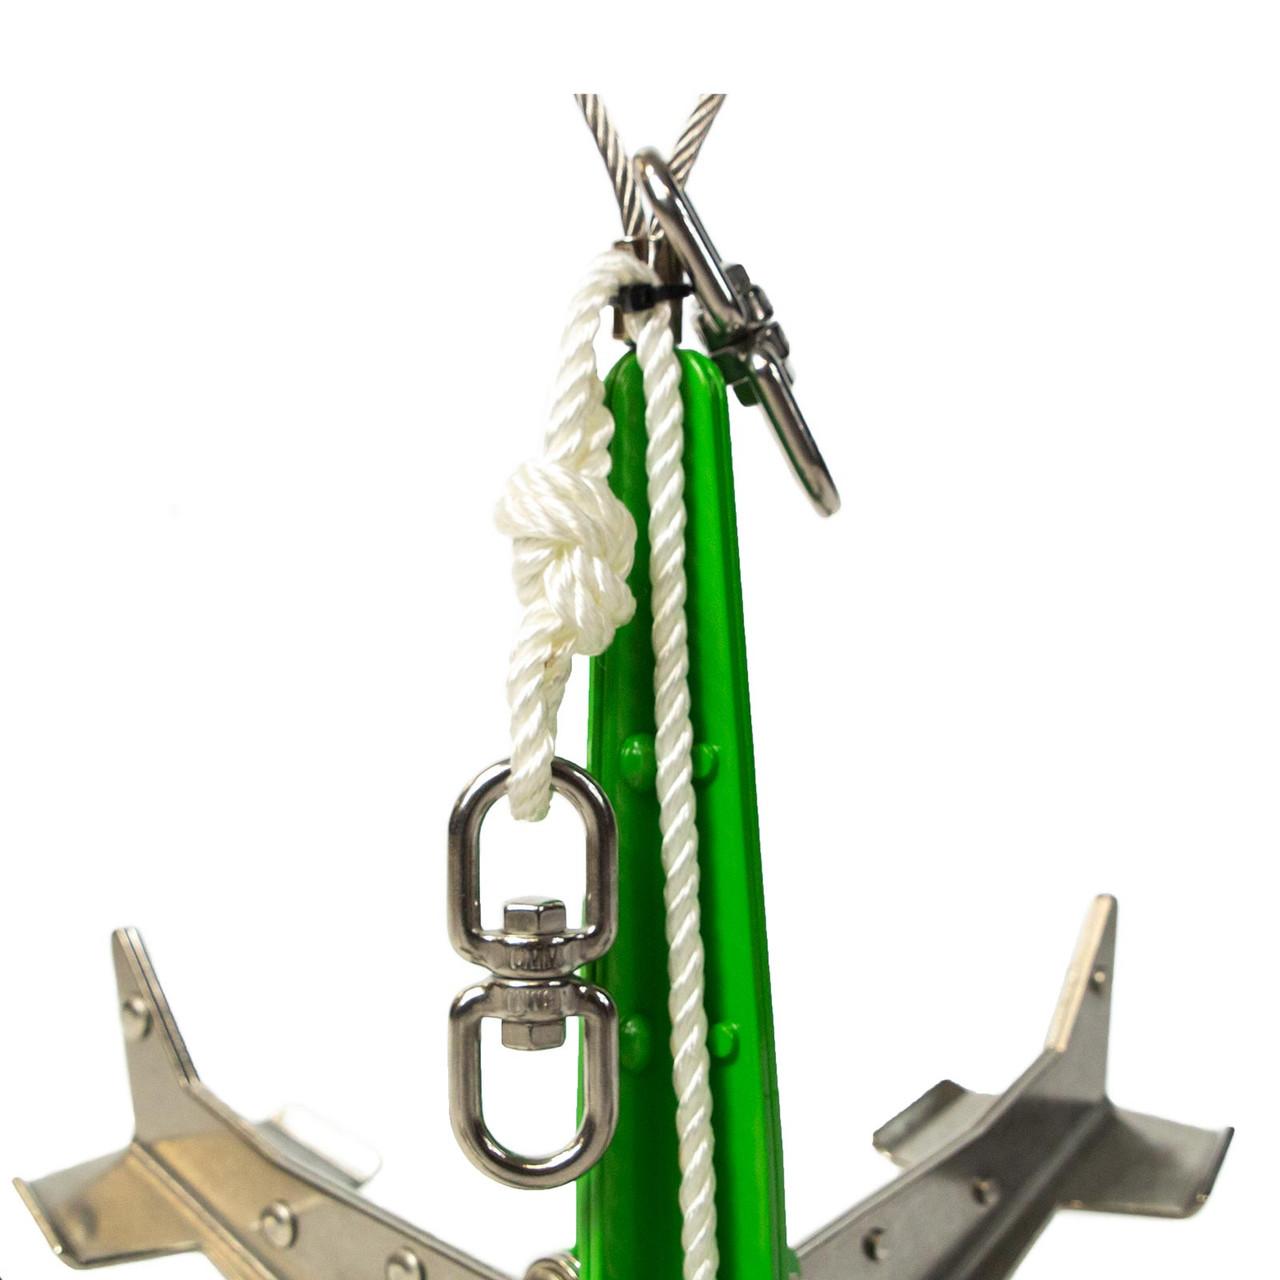 The Low Profile Anchor Wizard – Tightline Anchor